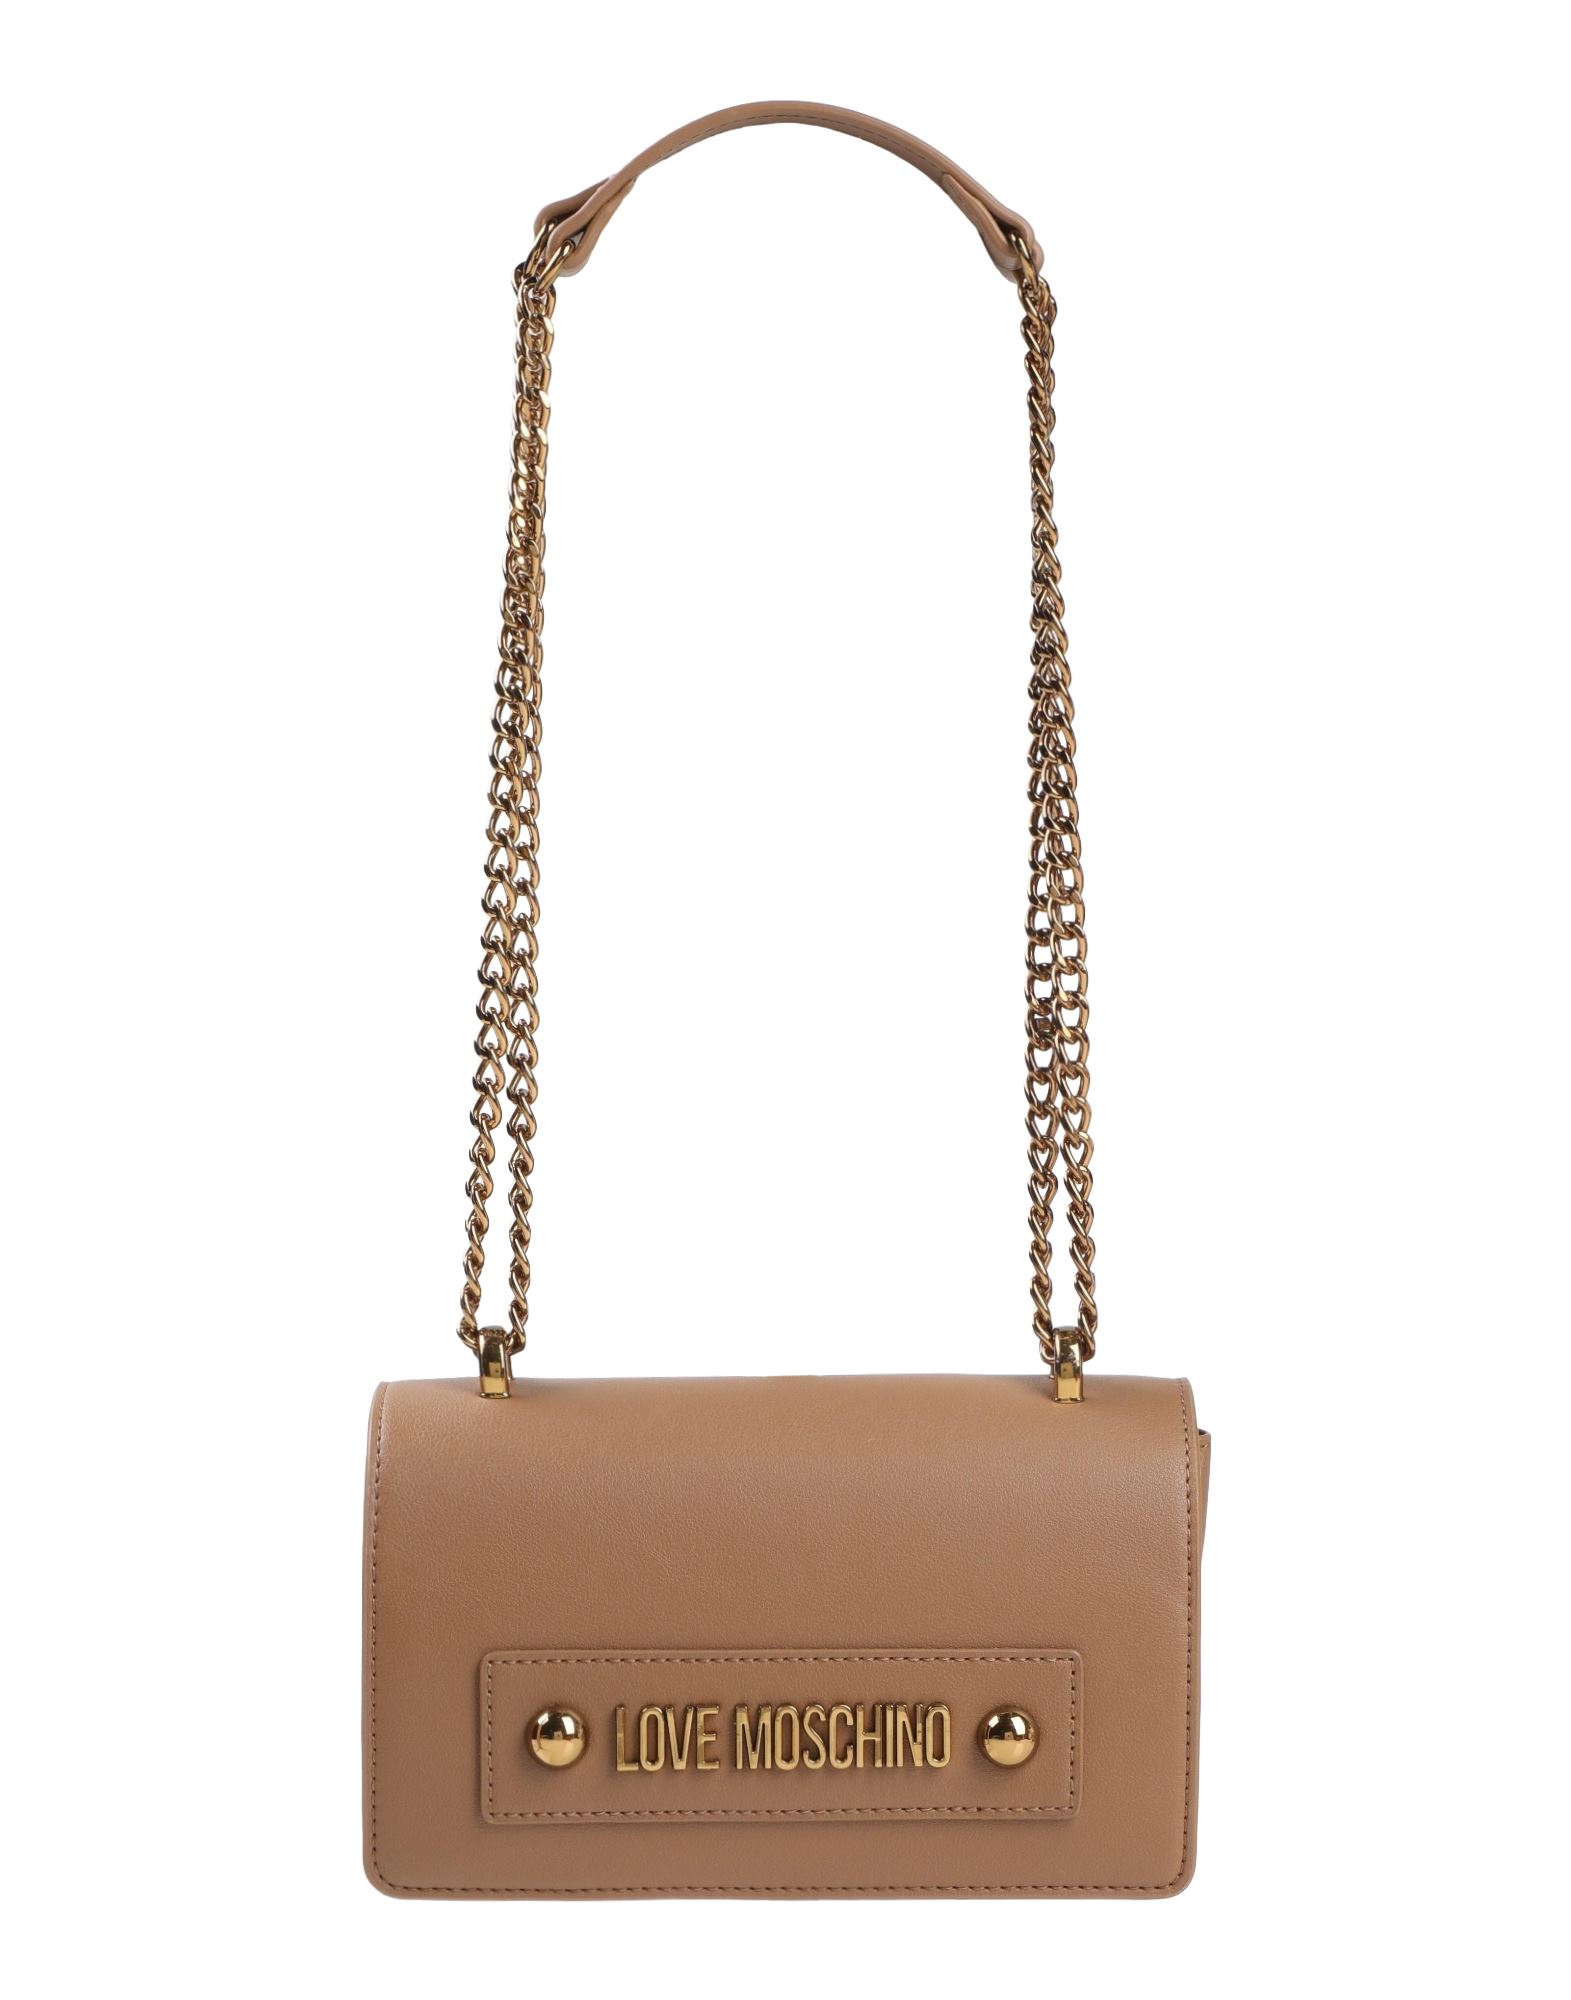 LOVE MOSCHINO Shoulder bags - Item 45553012